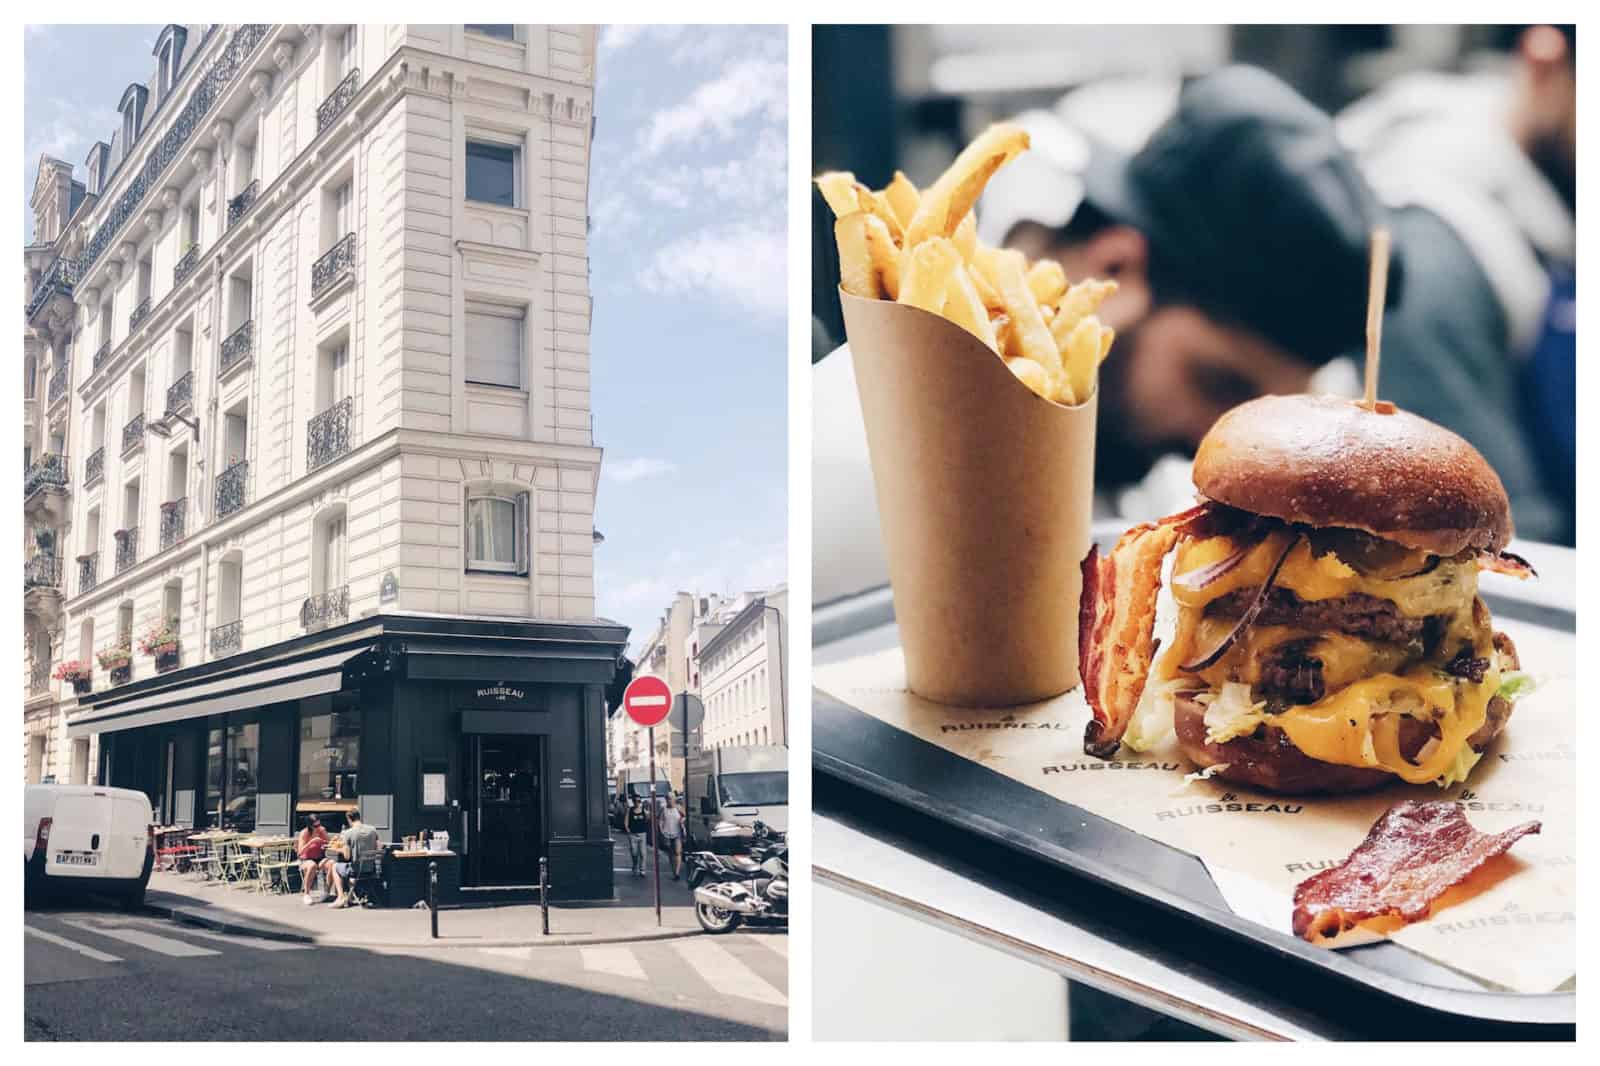 The Best Burgers in Paris can be found at Le Ruisseau in the 18th, slotted in at the bottom of an apartment building (left). Le Ruisseau does bacon, cheese and beef burgers with crispy fries (right). 